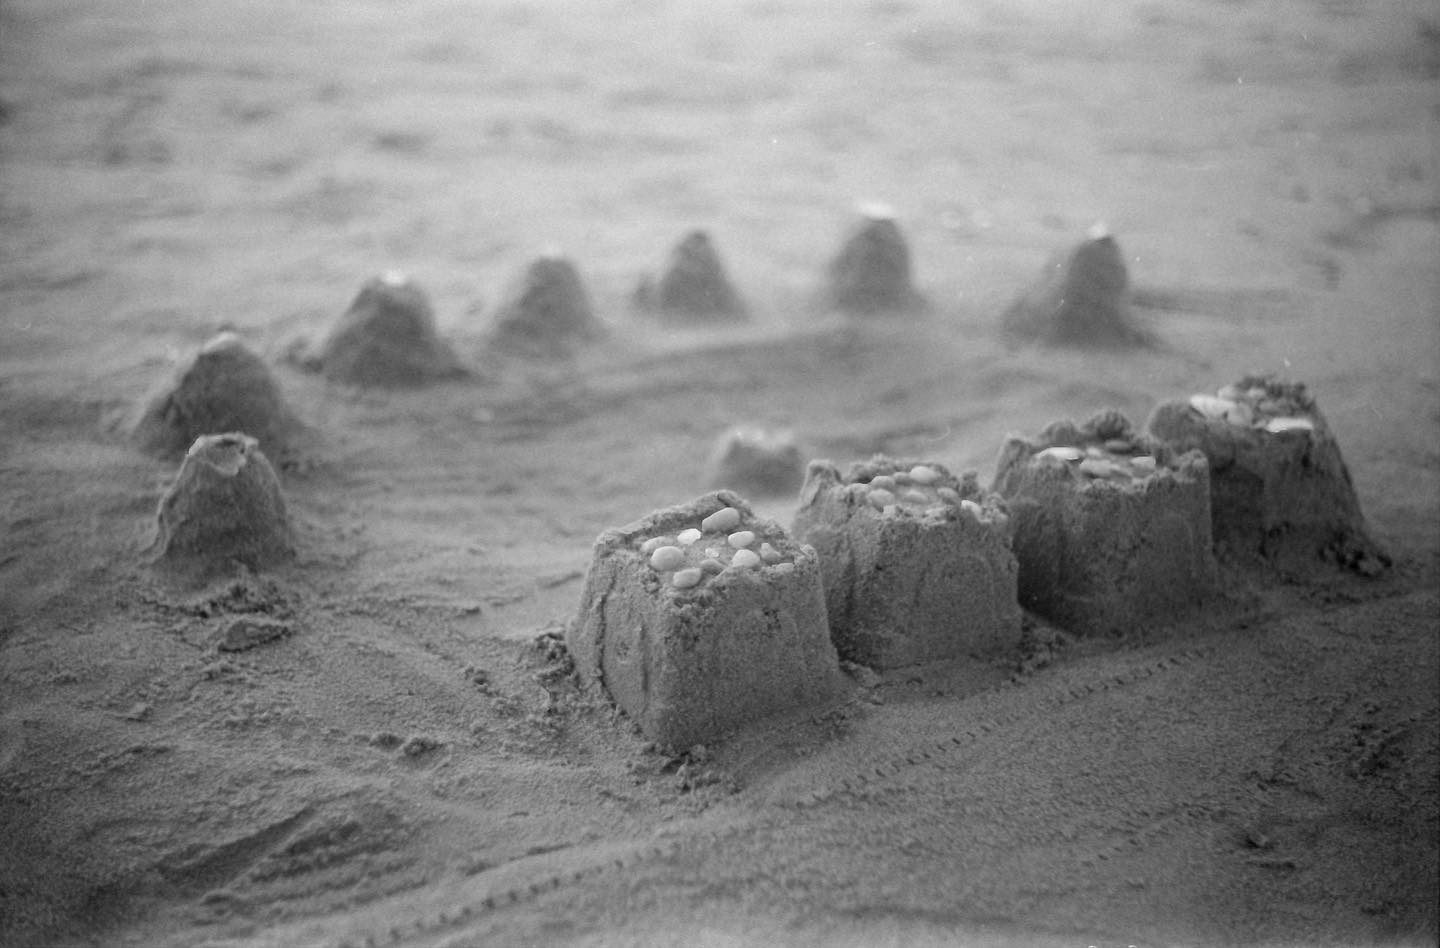 Sand Castles at Sunset

Left behind by a family visiting the beach. #rollfilmweek #rollfilmweek2020 #film #filmphotography #contaxiii Day 2, 2/2.